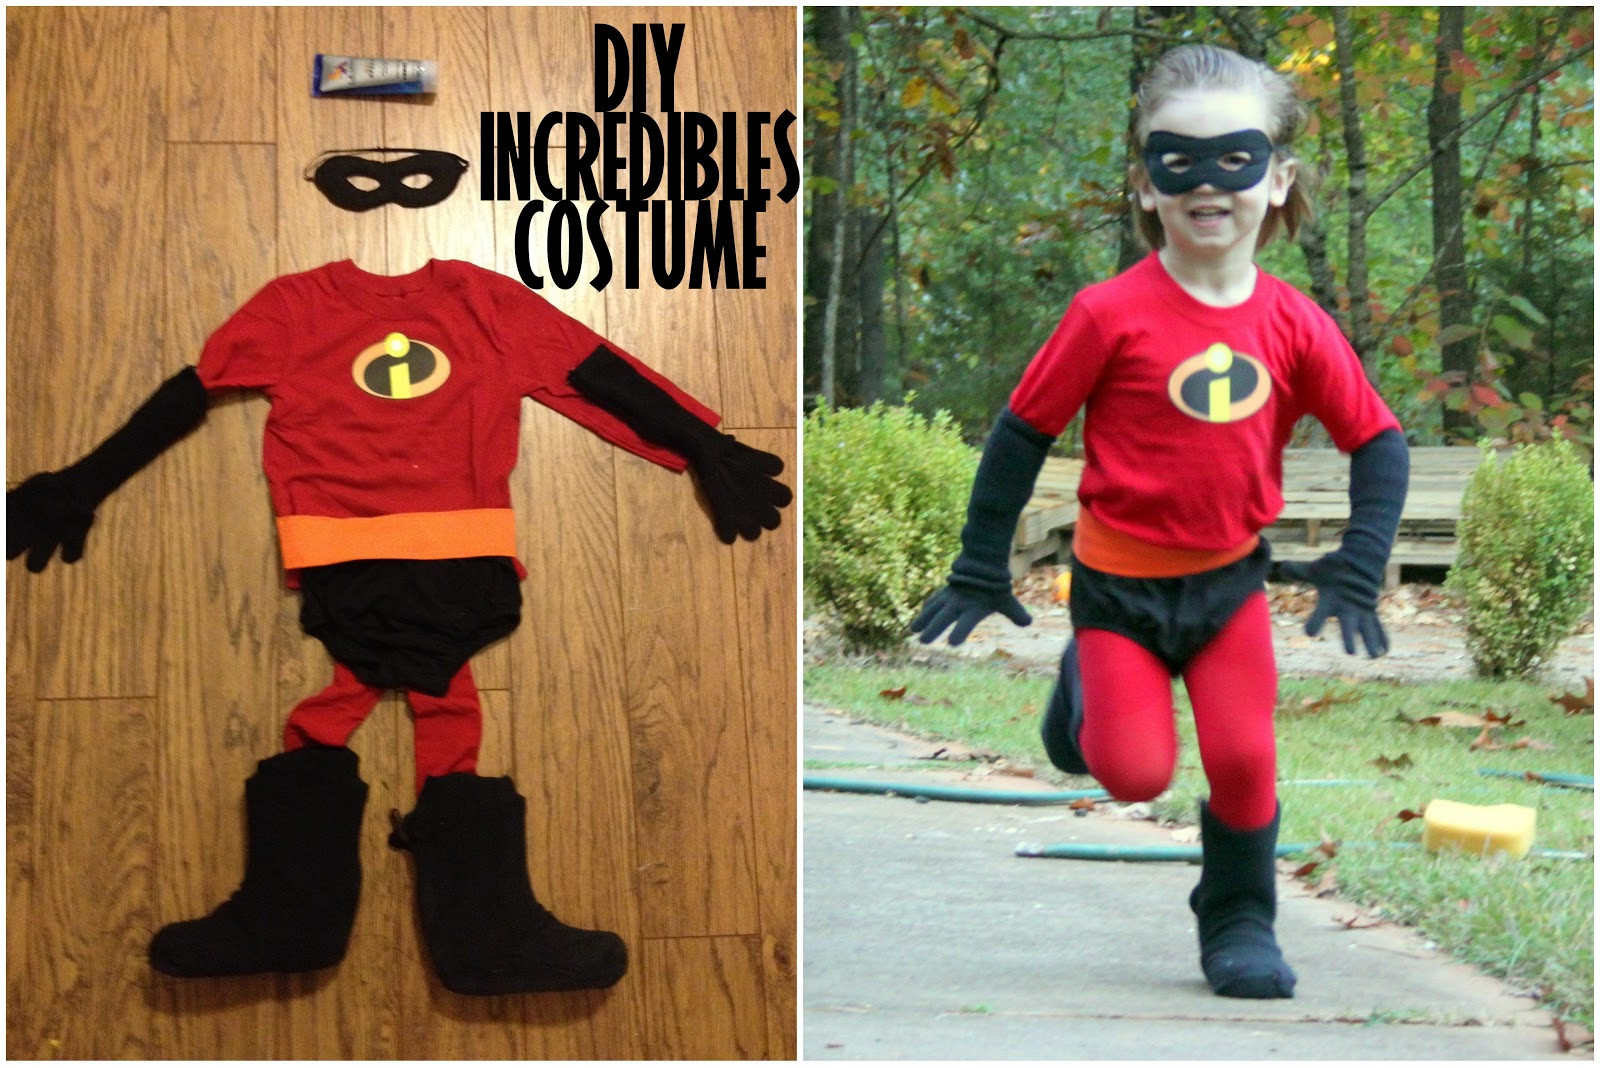 Incredibles Costume DIY
 Put Up Your Dukes an incredible costume